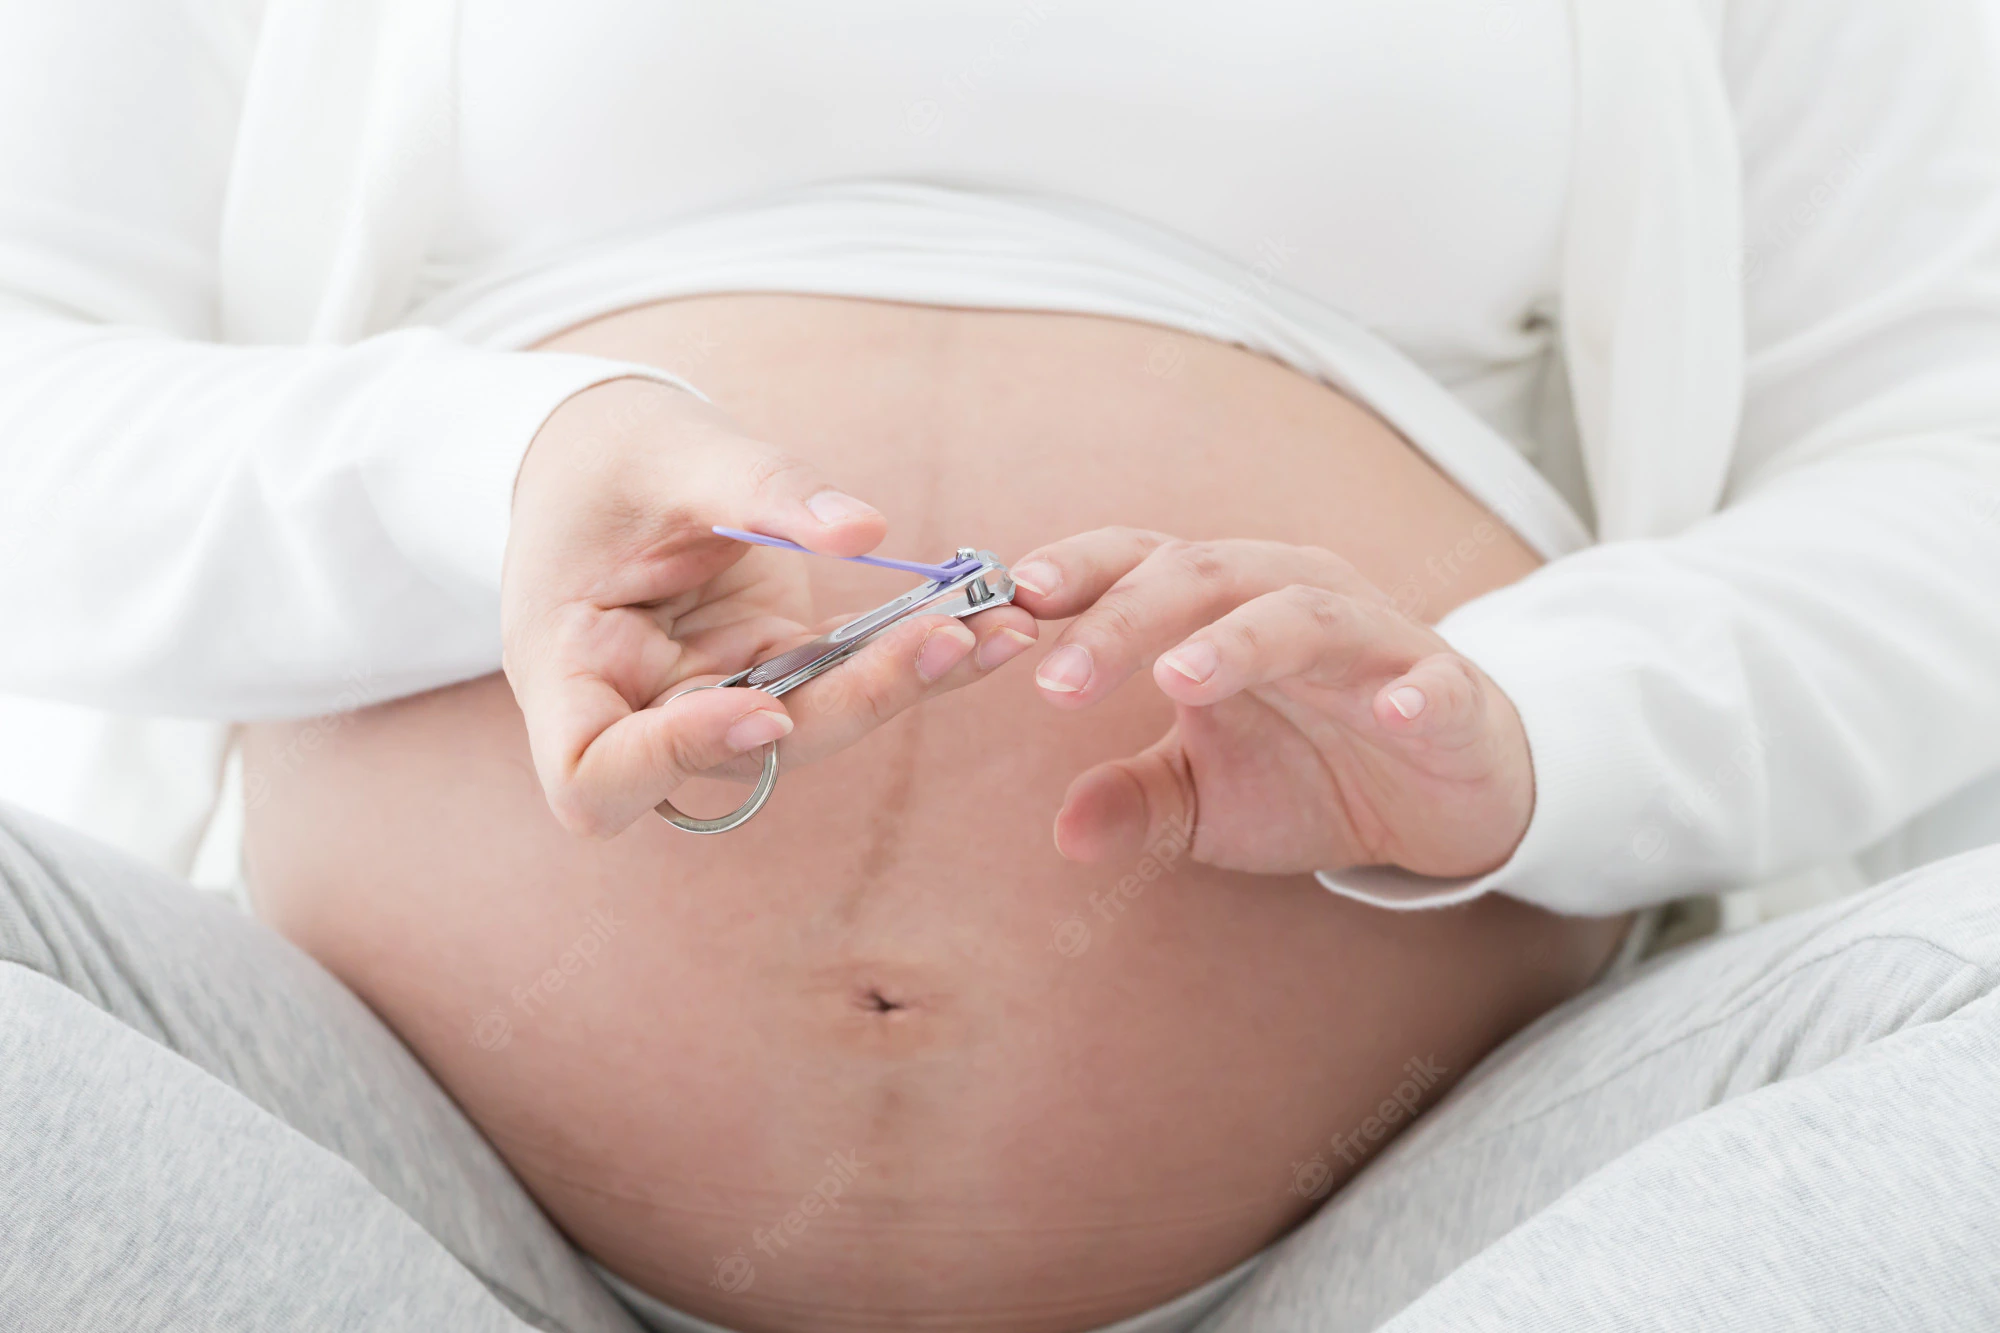 Can You Get Acrylic Nails While Pregnant?